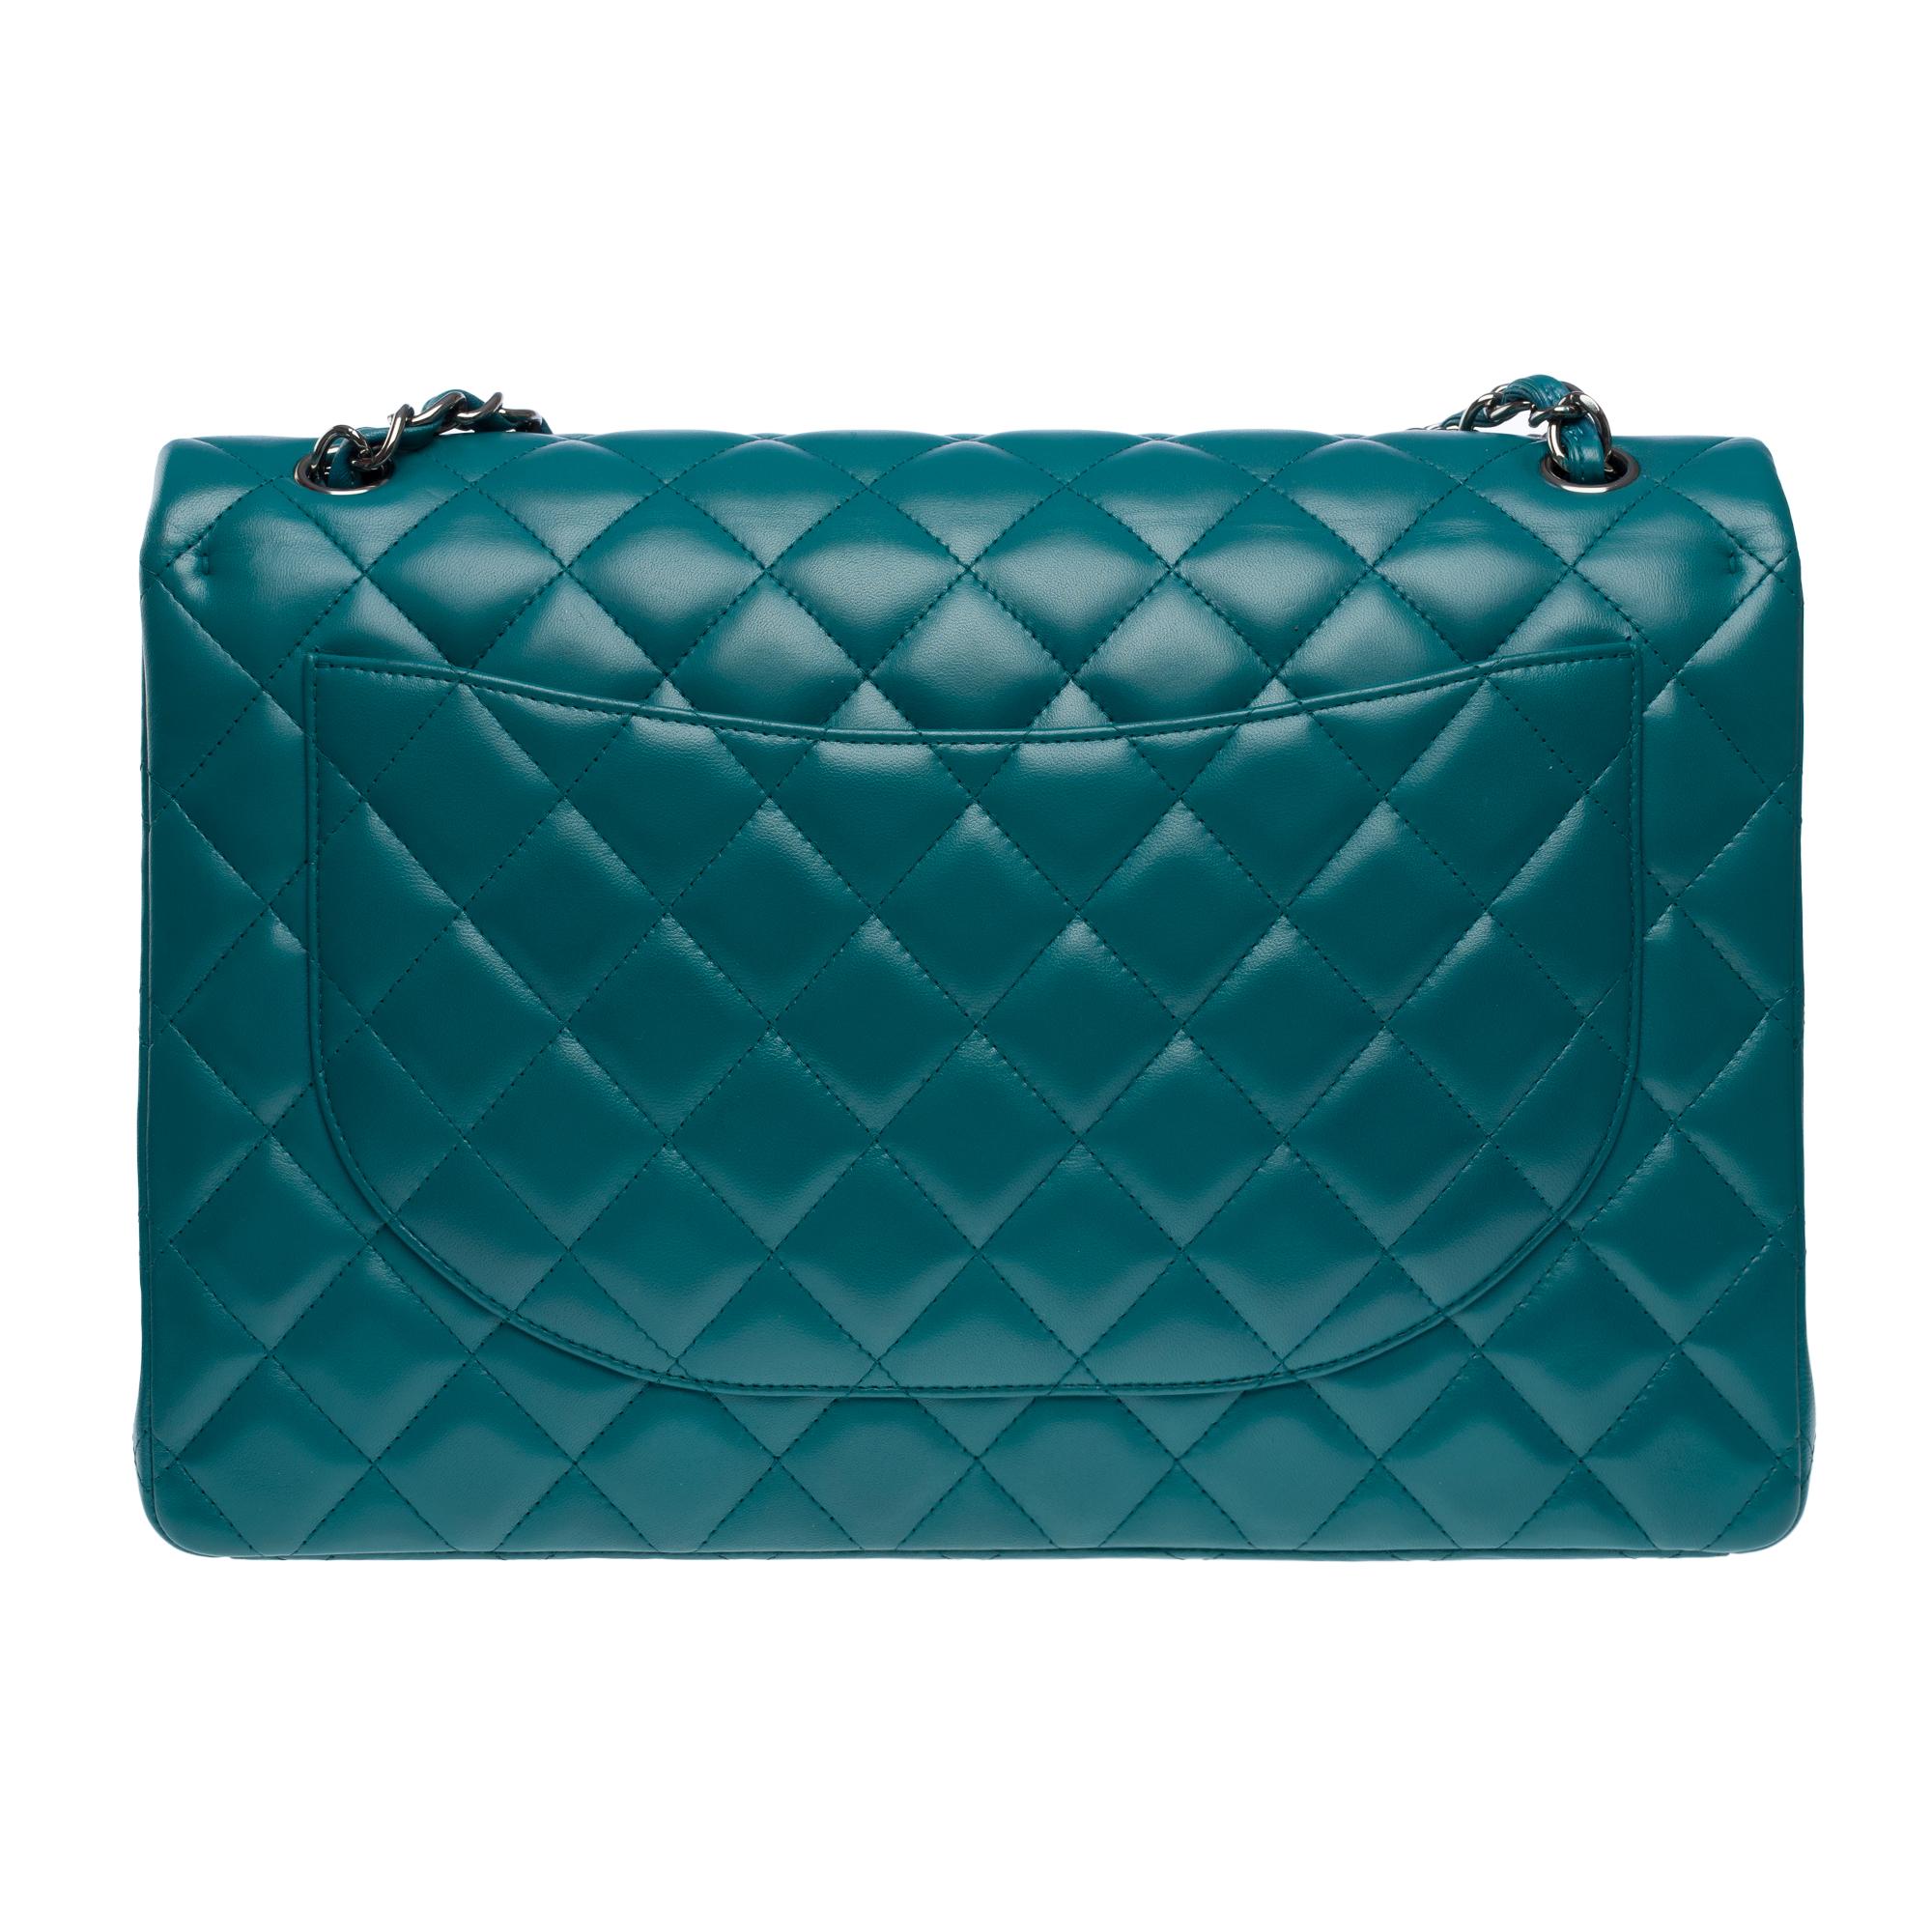 Women's Chanel Timeless Maxi Jumbo shoulder bag in Blue quilted lambskin leather, SHW For Sale